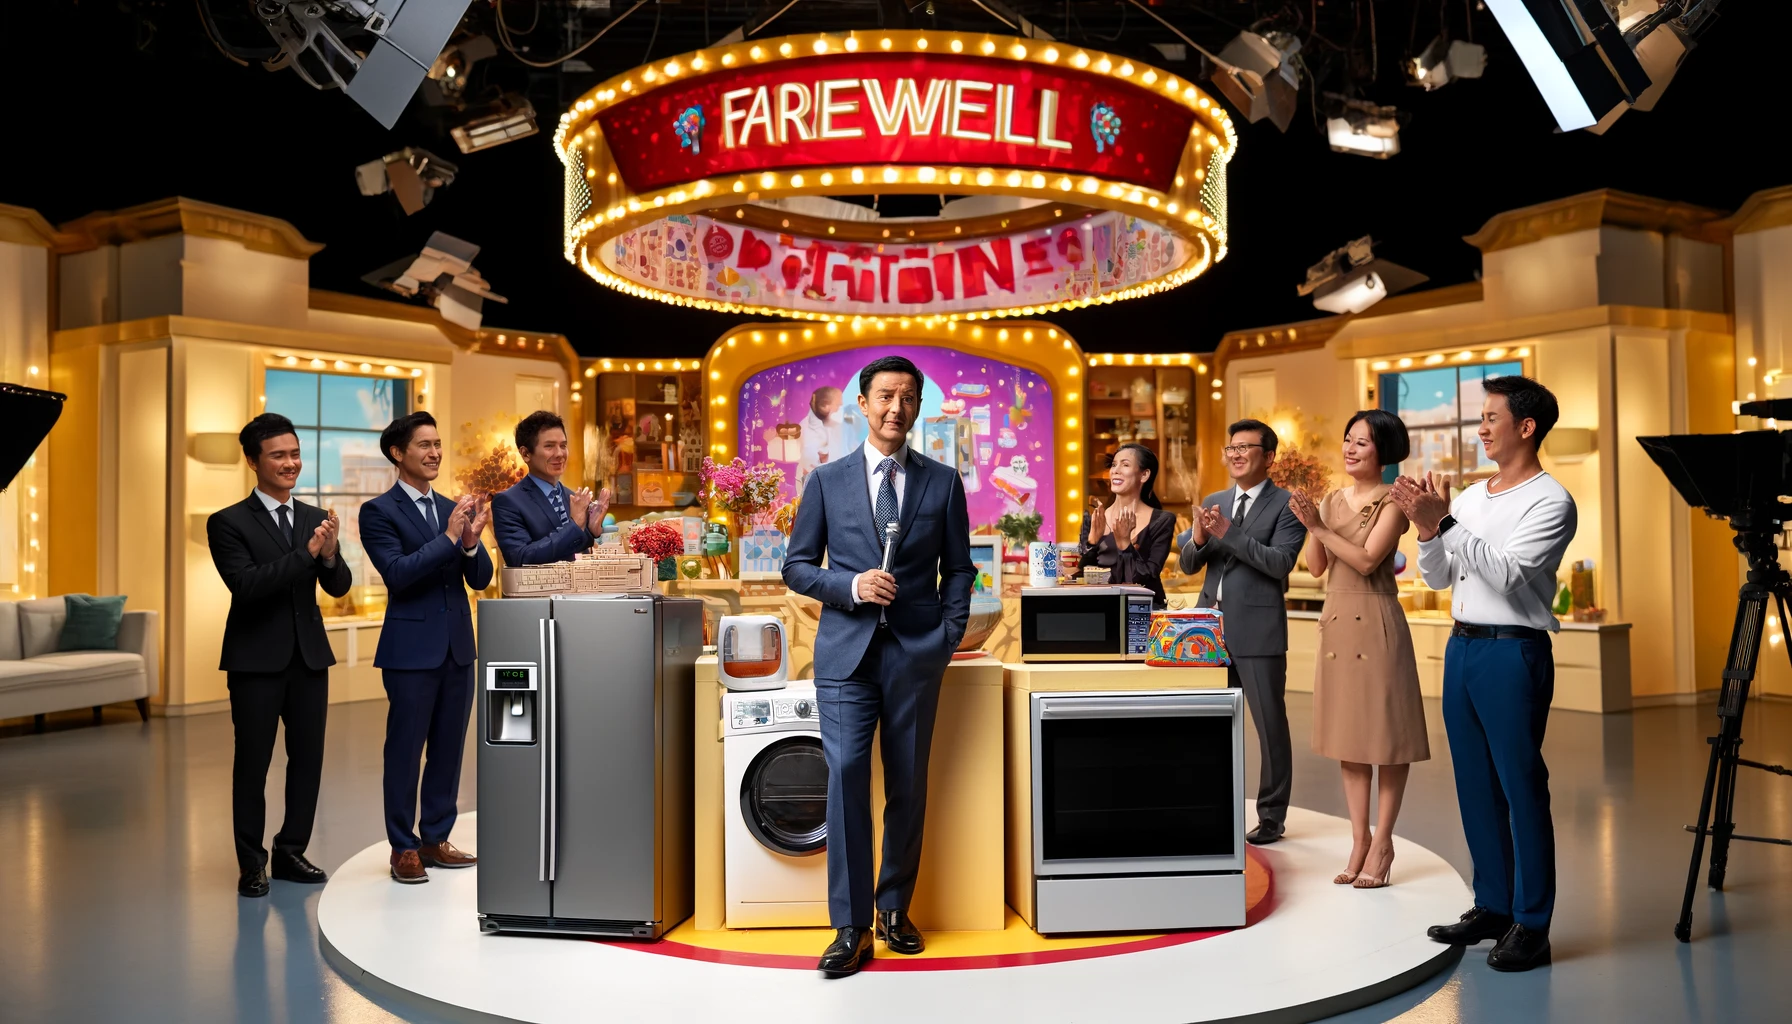 A lively television studio scene capturing the emotional moment of a popular TV shopping host's retirement, featuring various home appliances. The studio is decorated vibrantly with a large farewell banner. The host, a middle-aged Asian man with short black hair, wears a smart suit and holds a microphone, surrounded by colleagues and a small audience clapping. Displayed around him are several home appliances like a modern refrigerator, a flat-screen TV, and a microwave. The background features cameras and studio lights, creating a celebratory atmosphere.